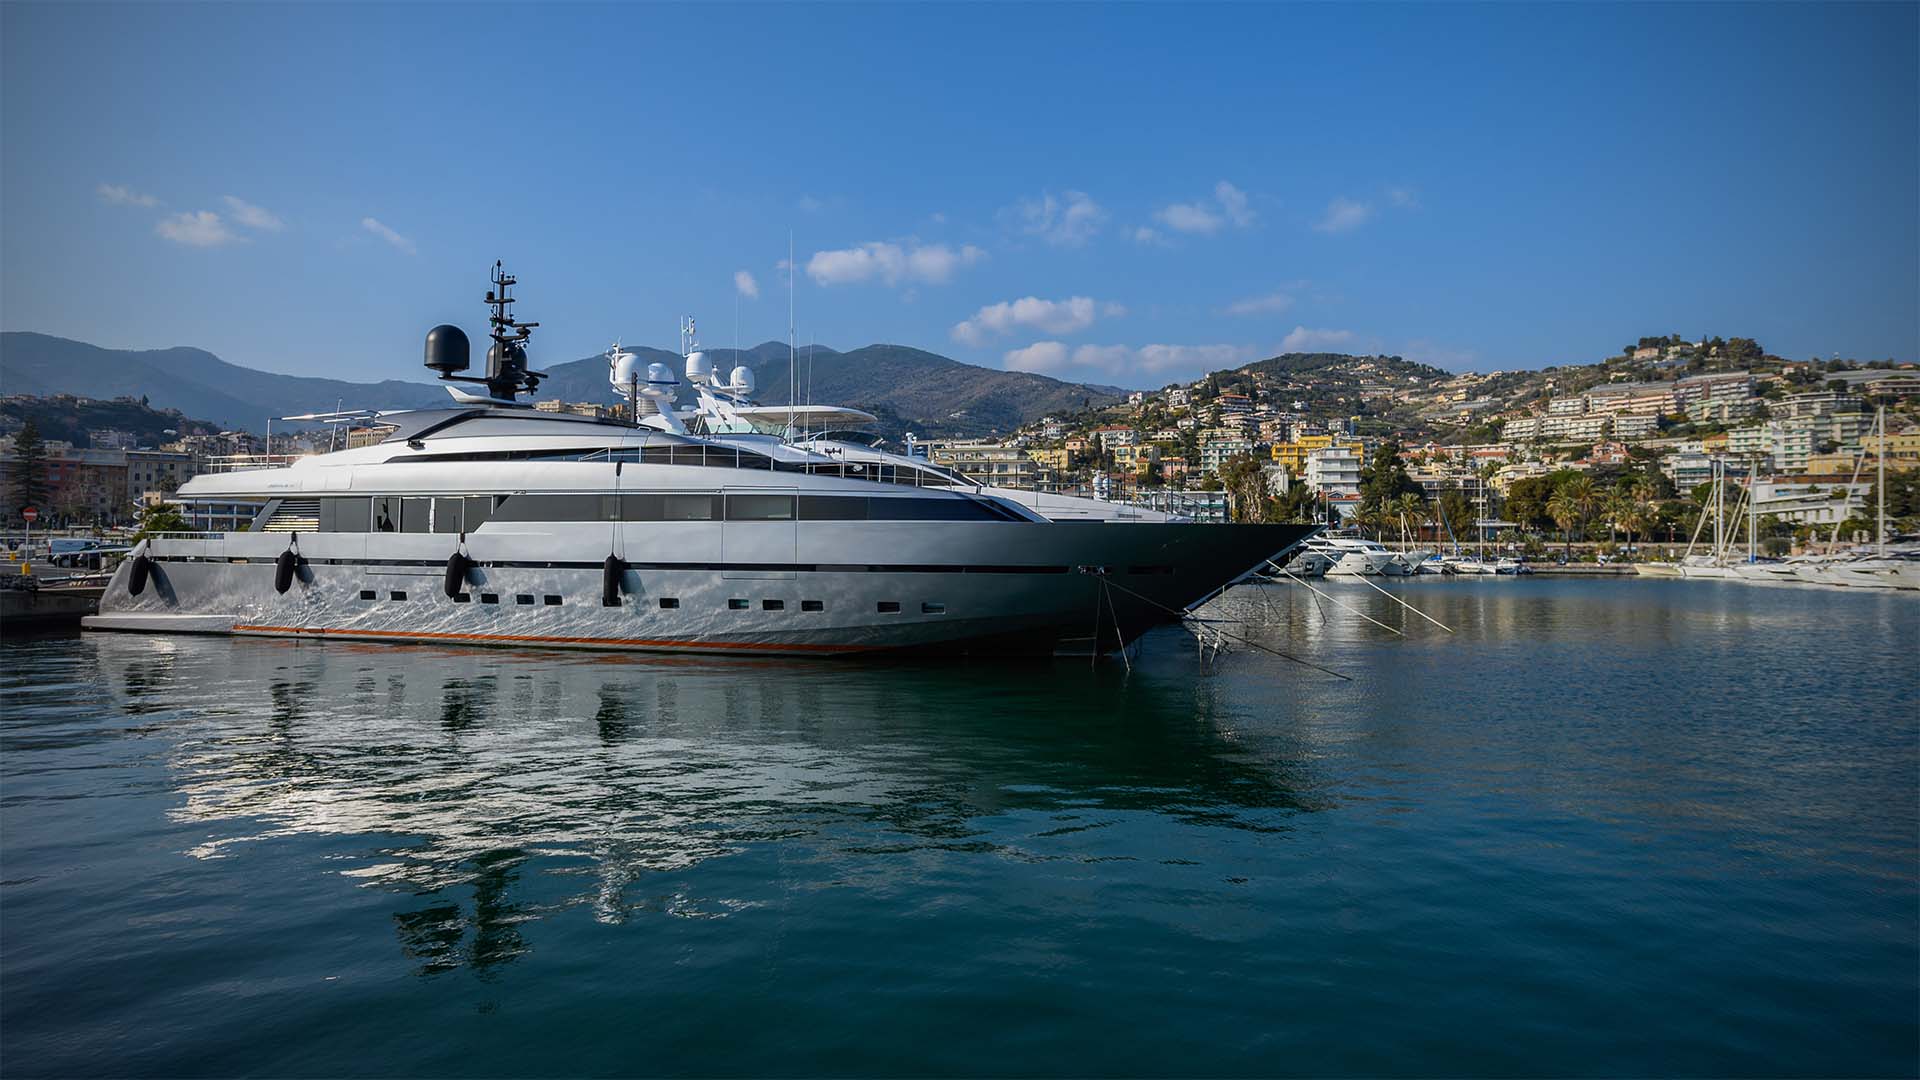 Who helps Russian oligarchs secretly buy jets, yachts and other luxury playthings?